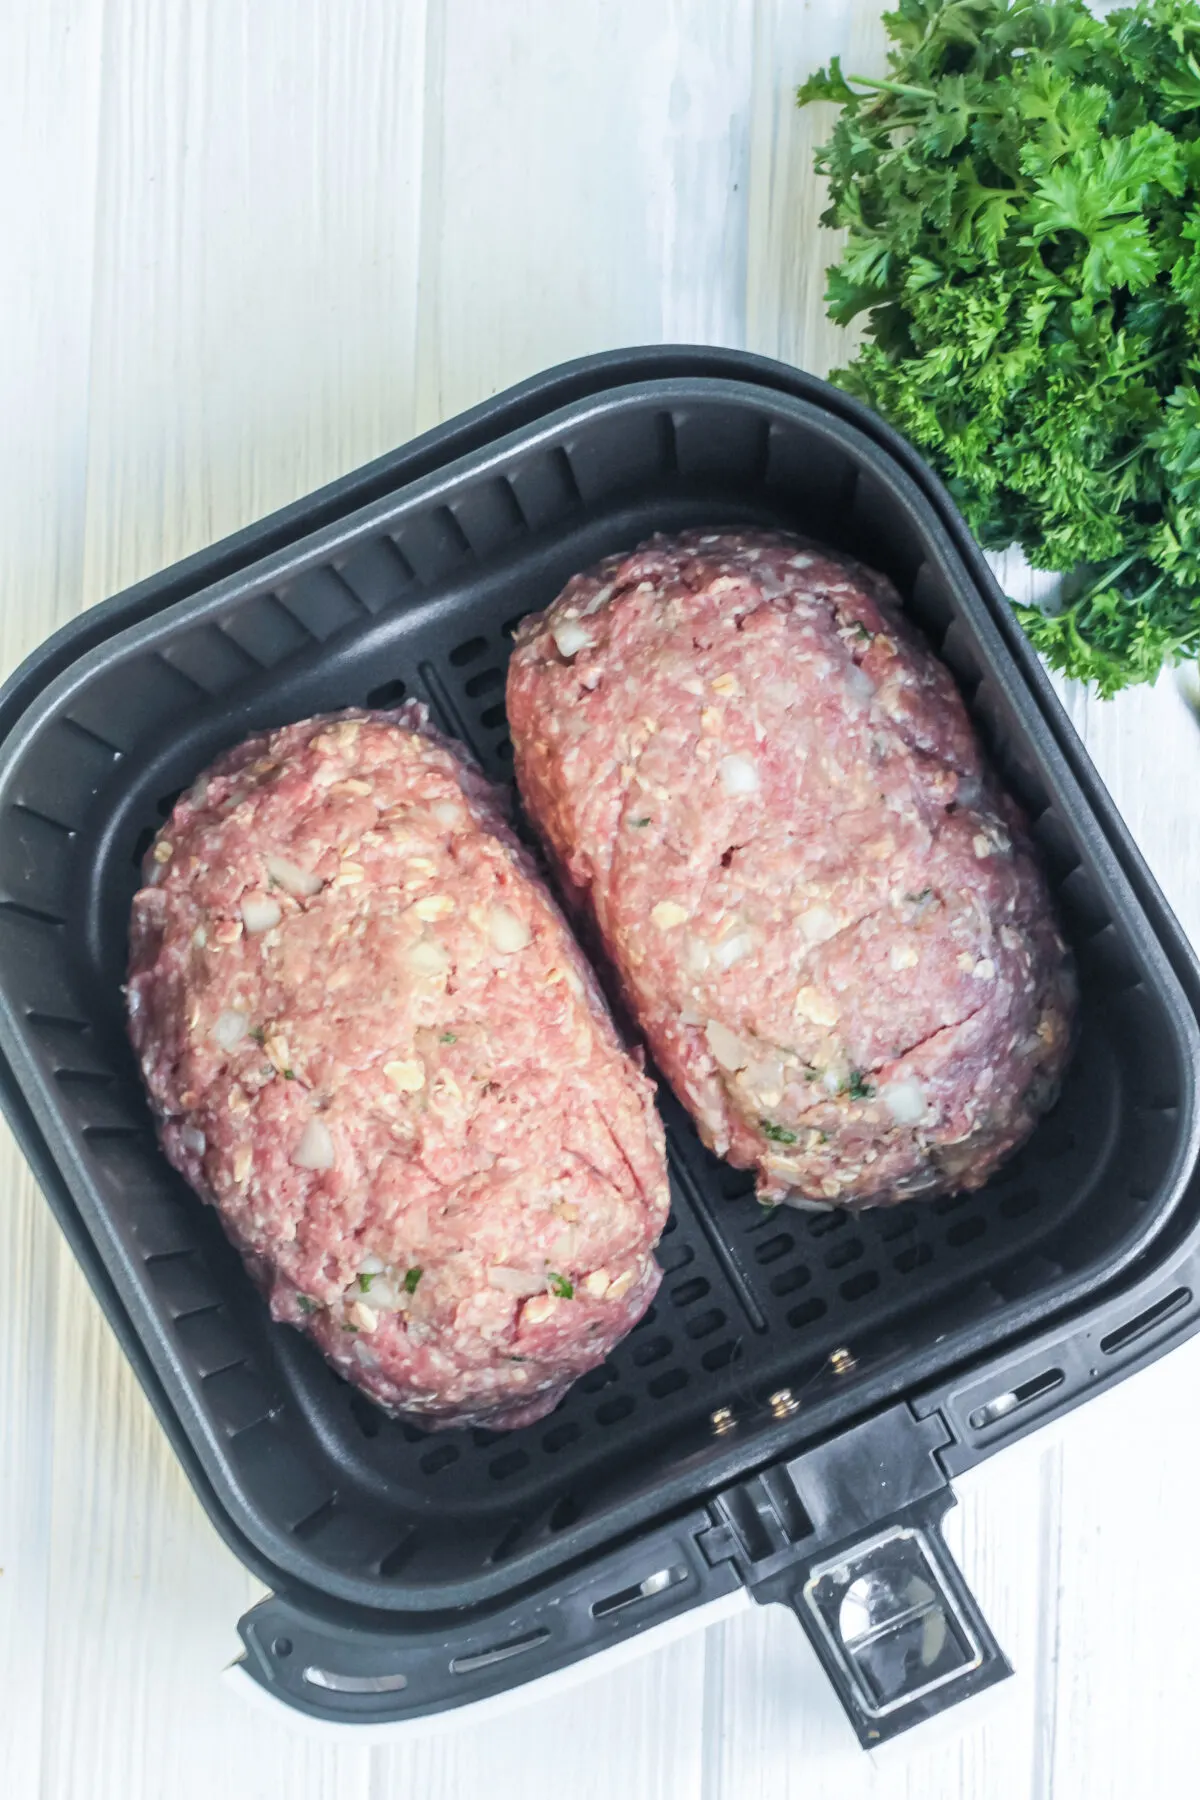 Two meatloaves in an air fryer basket ready to cook.